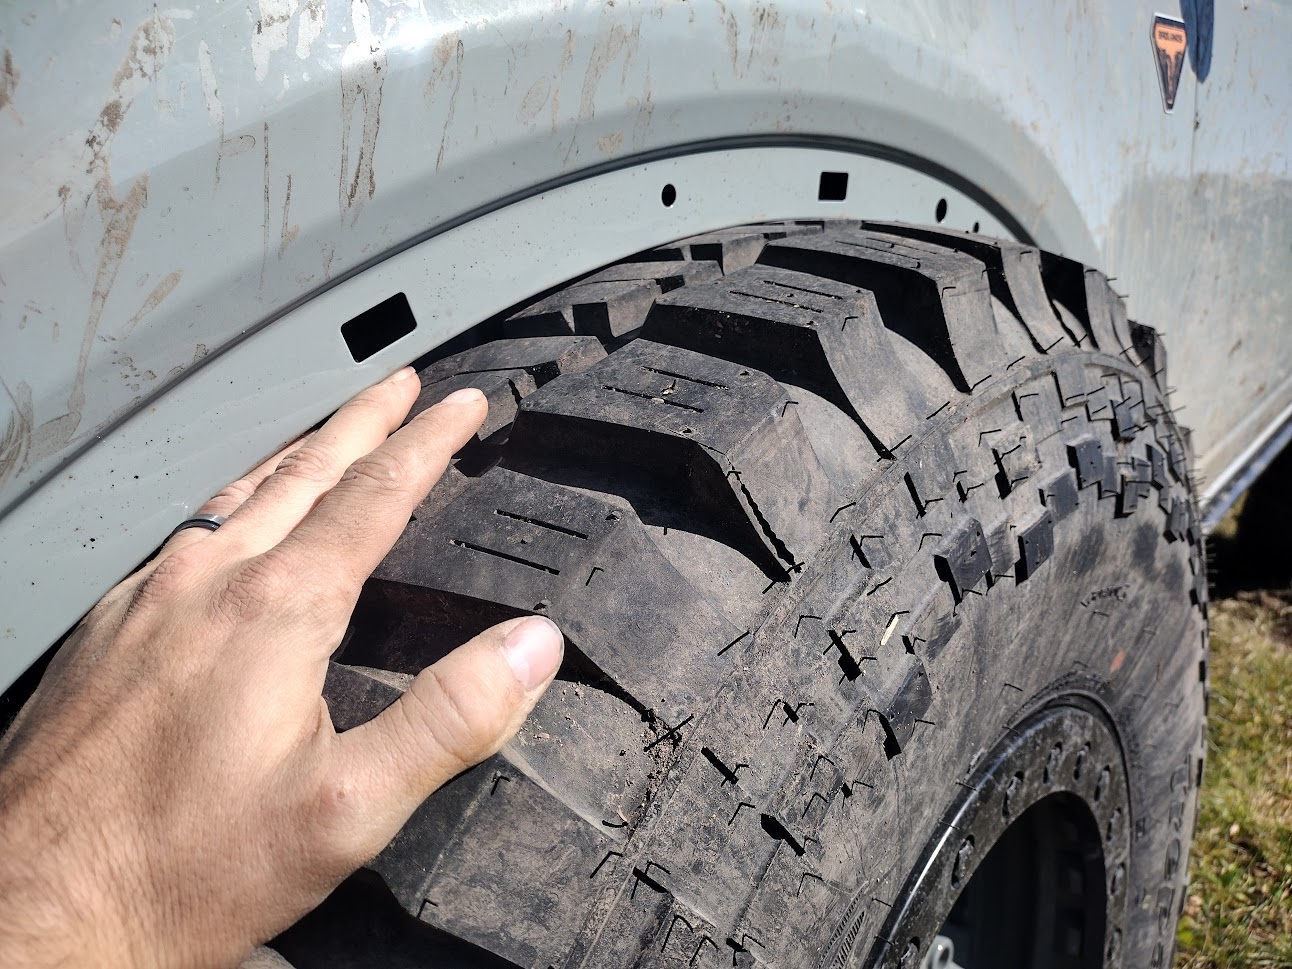 Ford Bronco 37" Tires on a Non-Sasquatch Badlands - My Experience, Results, Pics 1666477540371